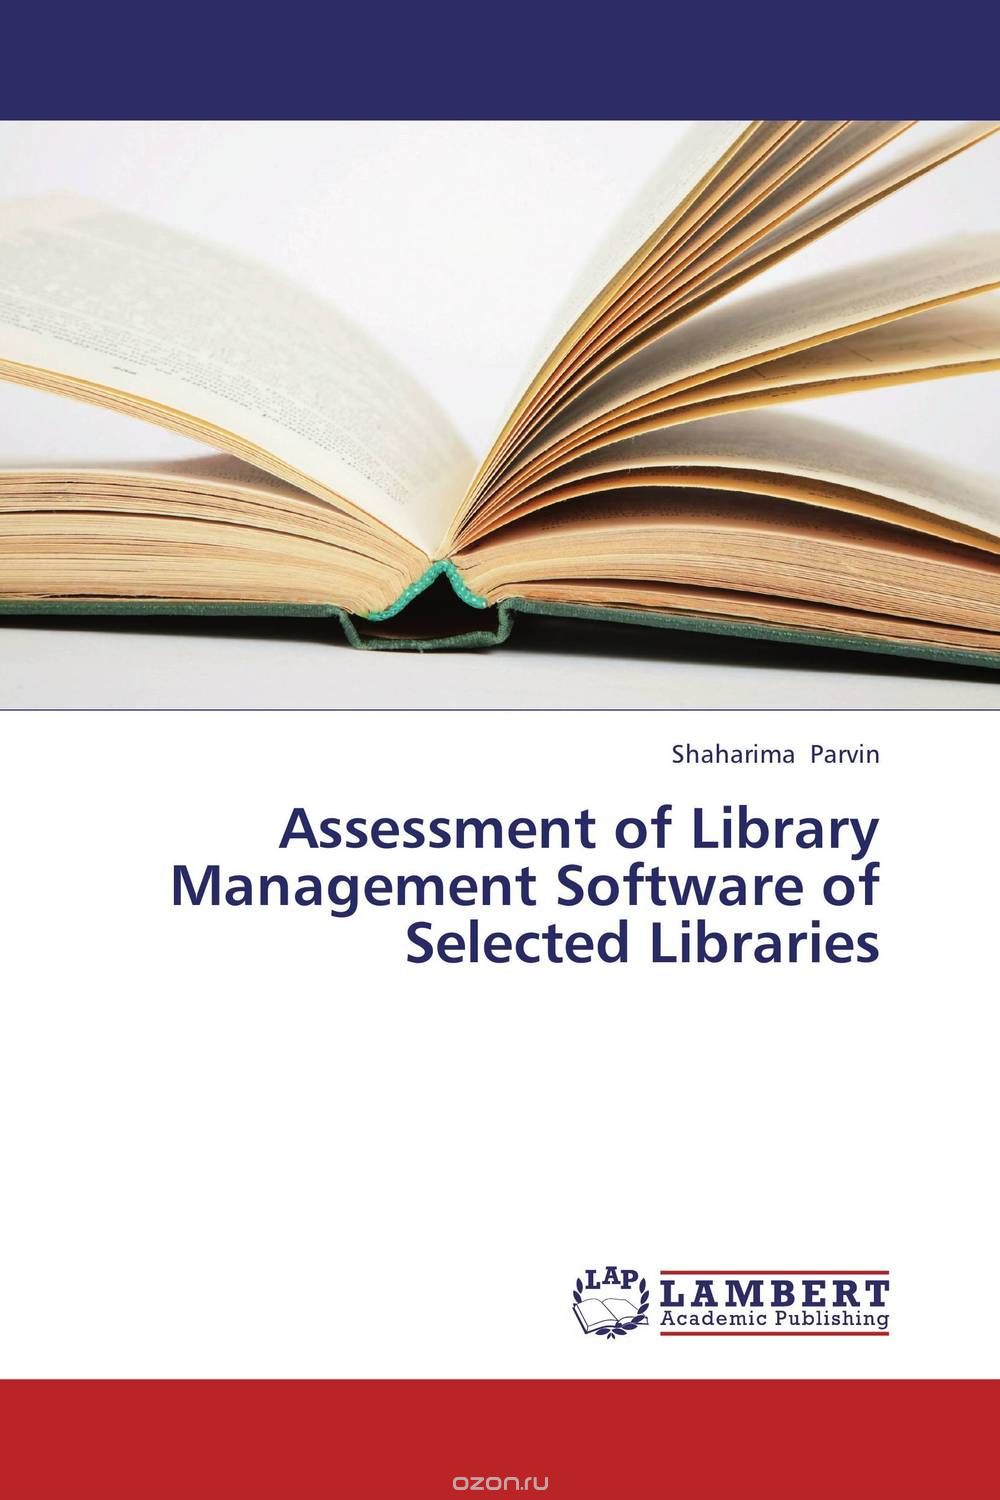 Скачать книгу "Assessment of Library Management Software of Selected Libraries"